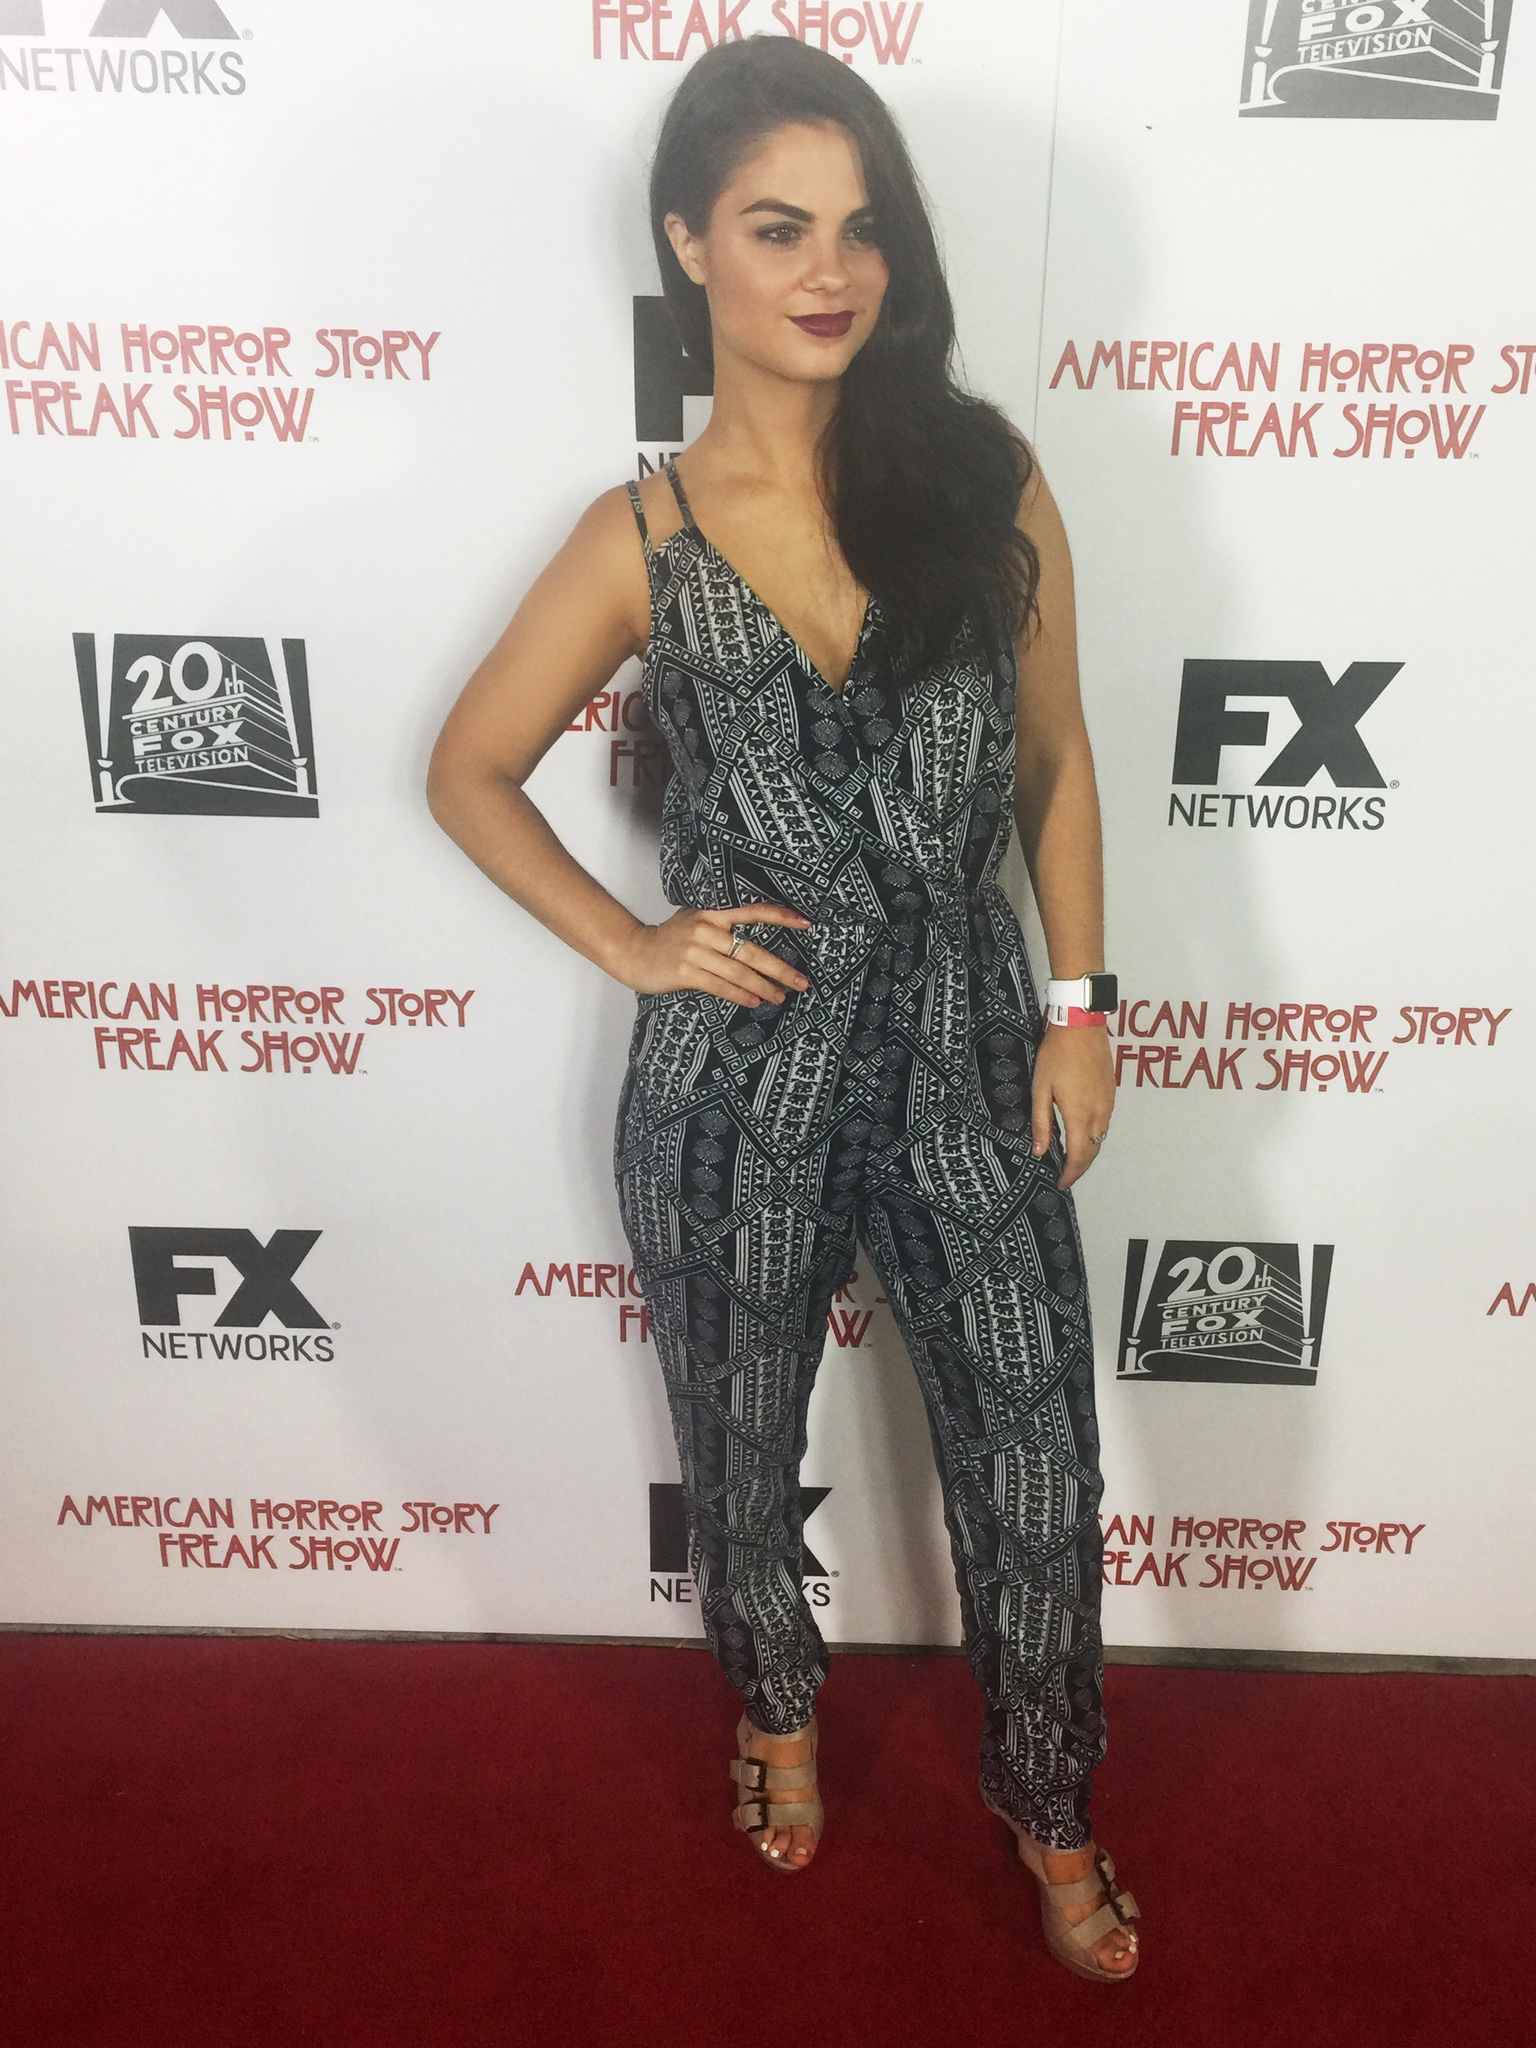 Jessica Montville at the American Horror Story Screening & Red Carpet Reception at Paramount Studios